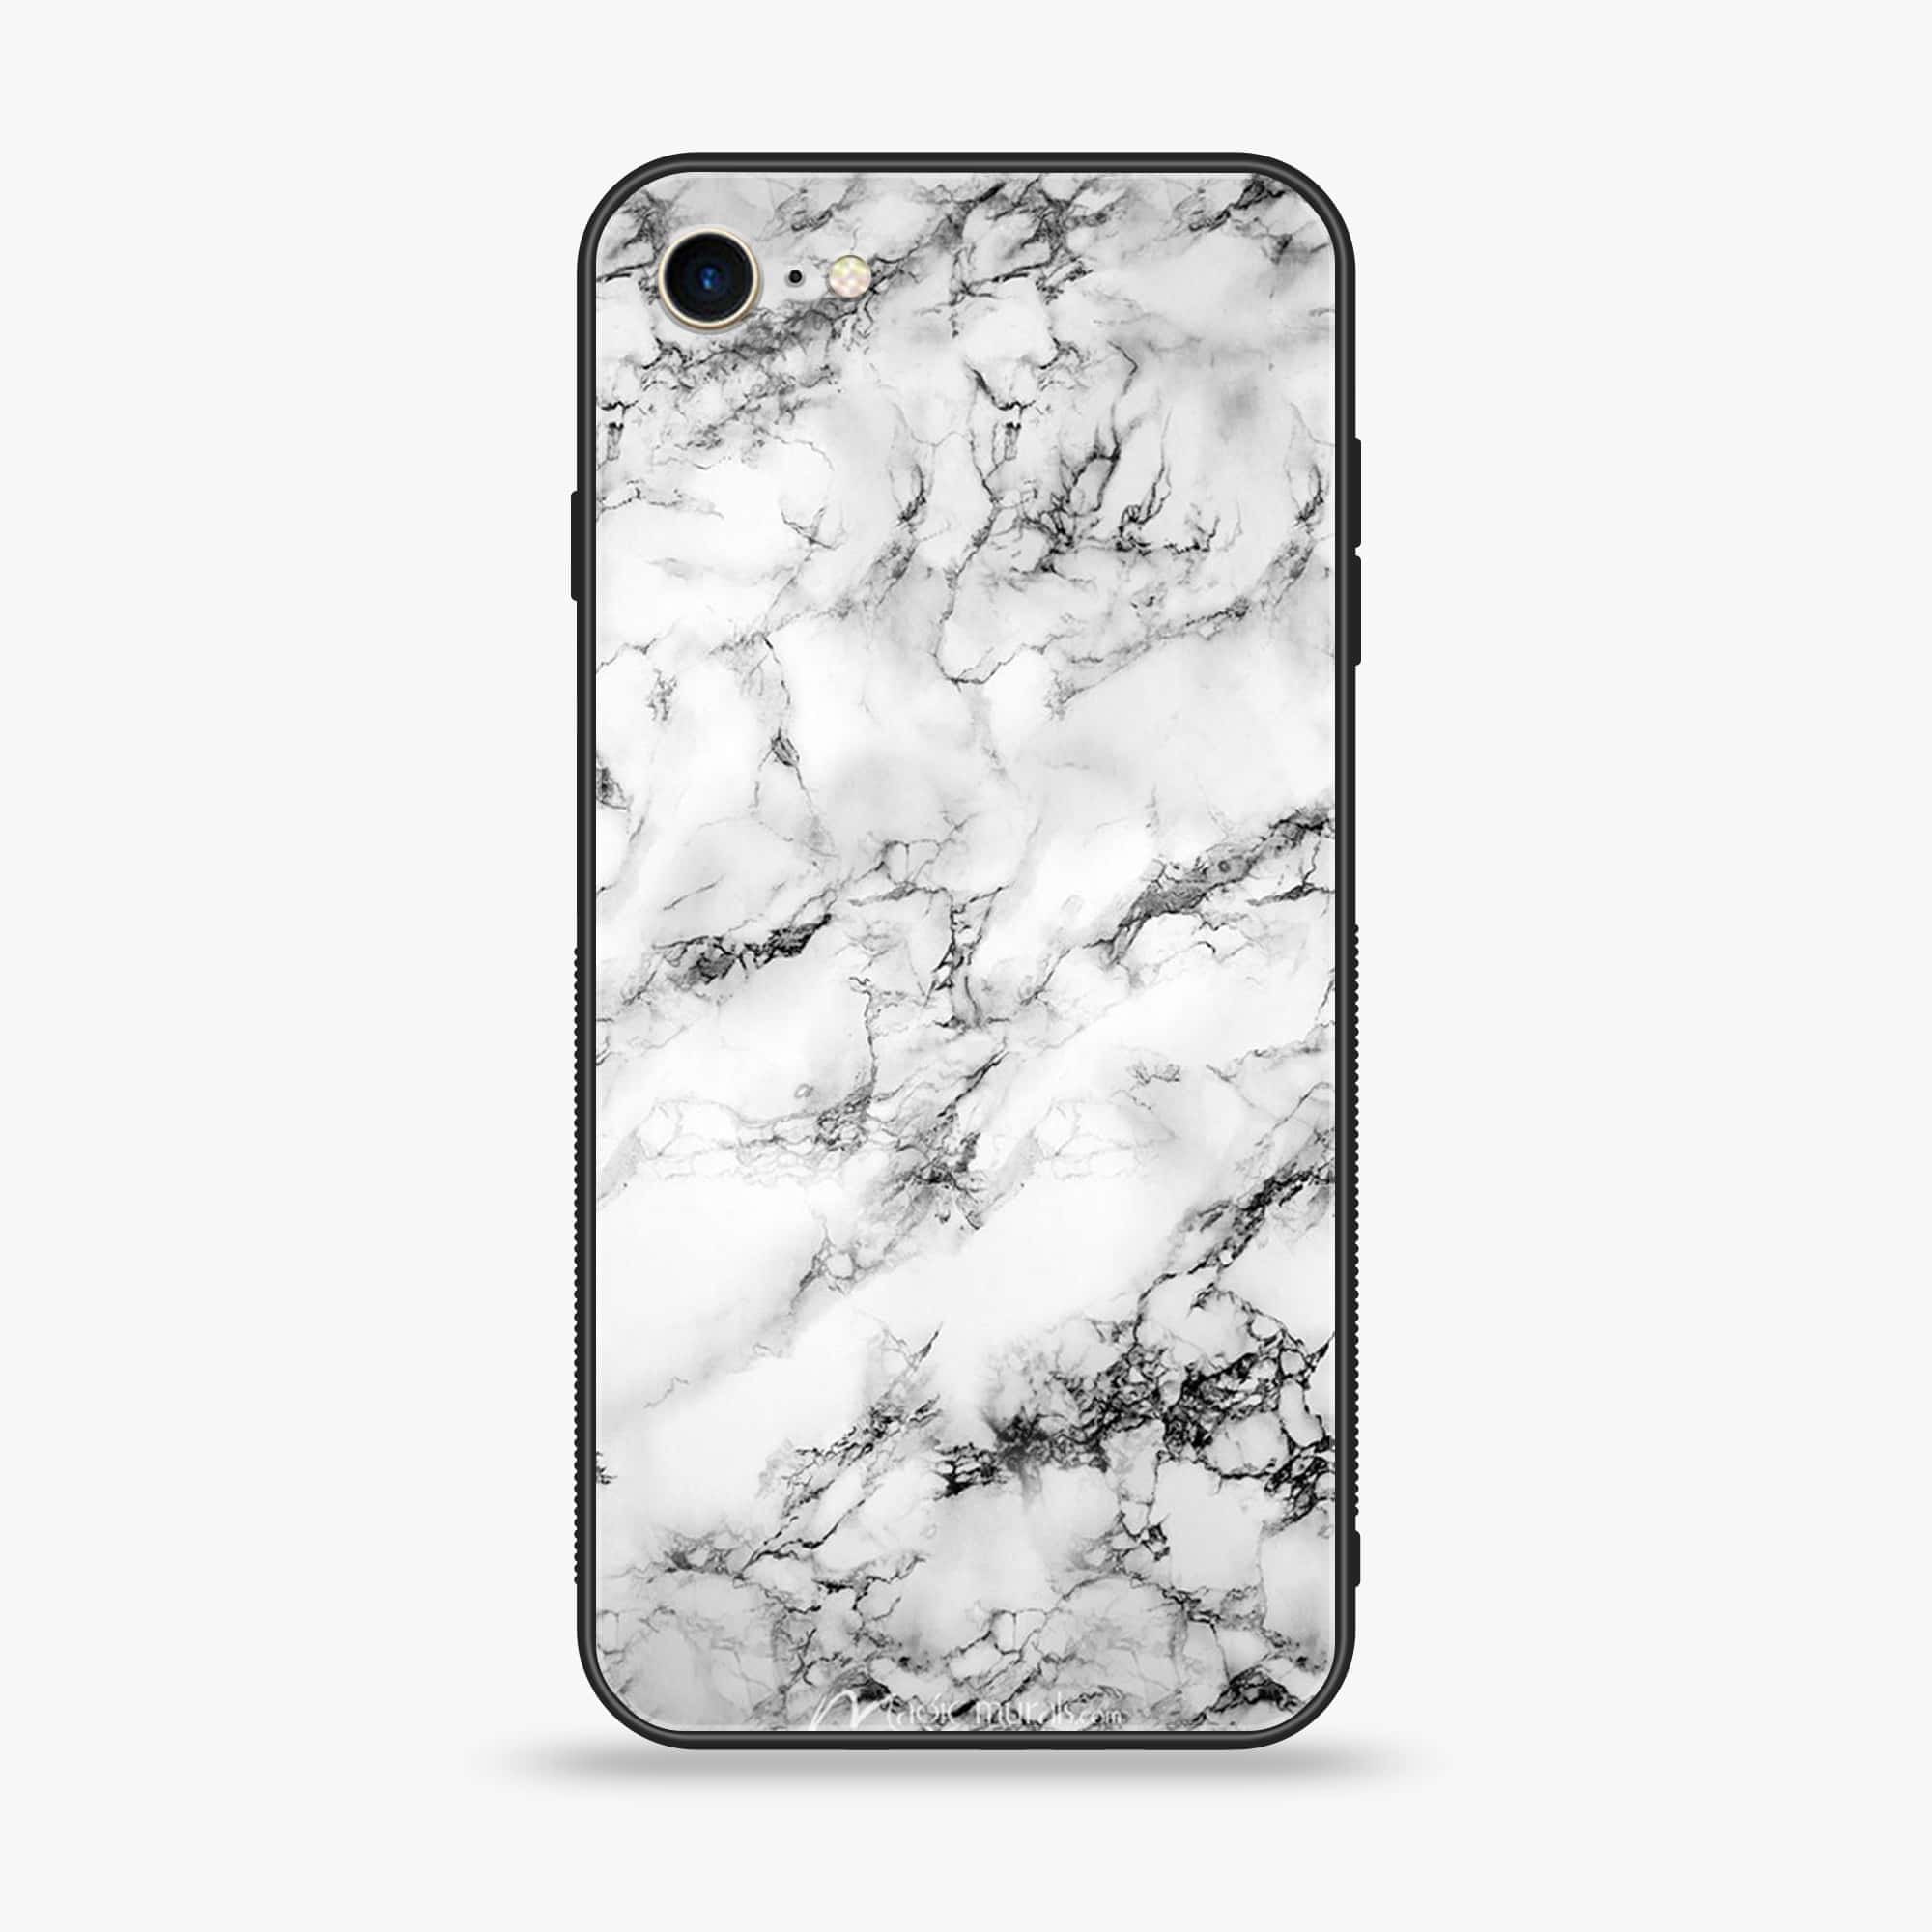 iPhone 7 - White Marble Series - Premium Printed Glass soft Bumper shock Proof Case